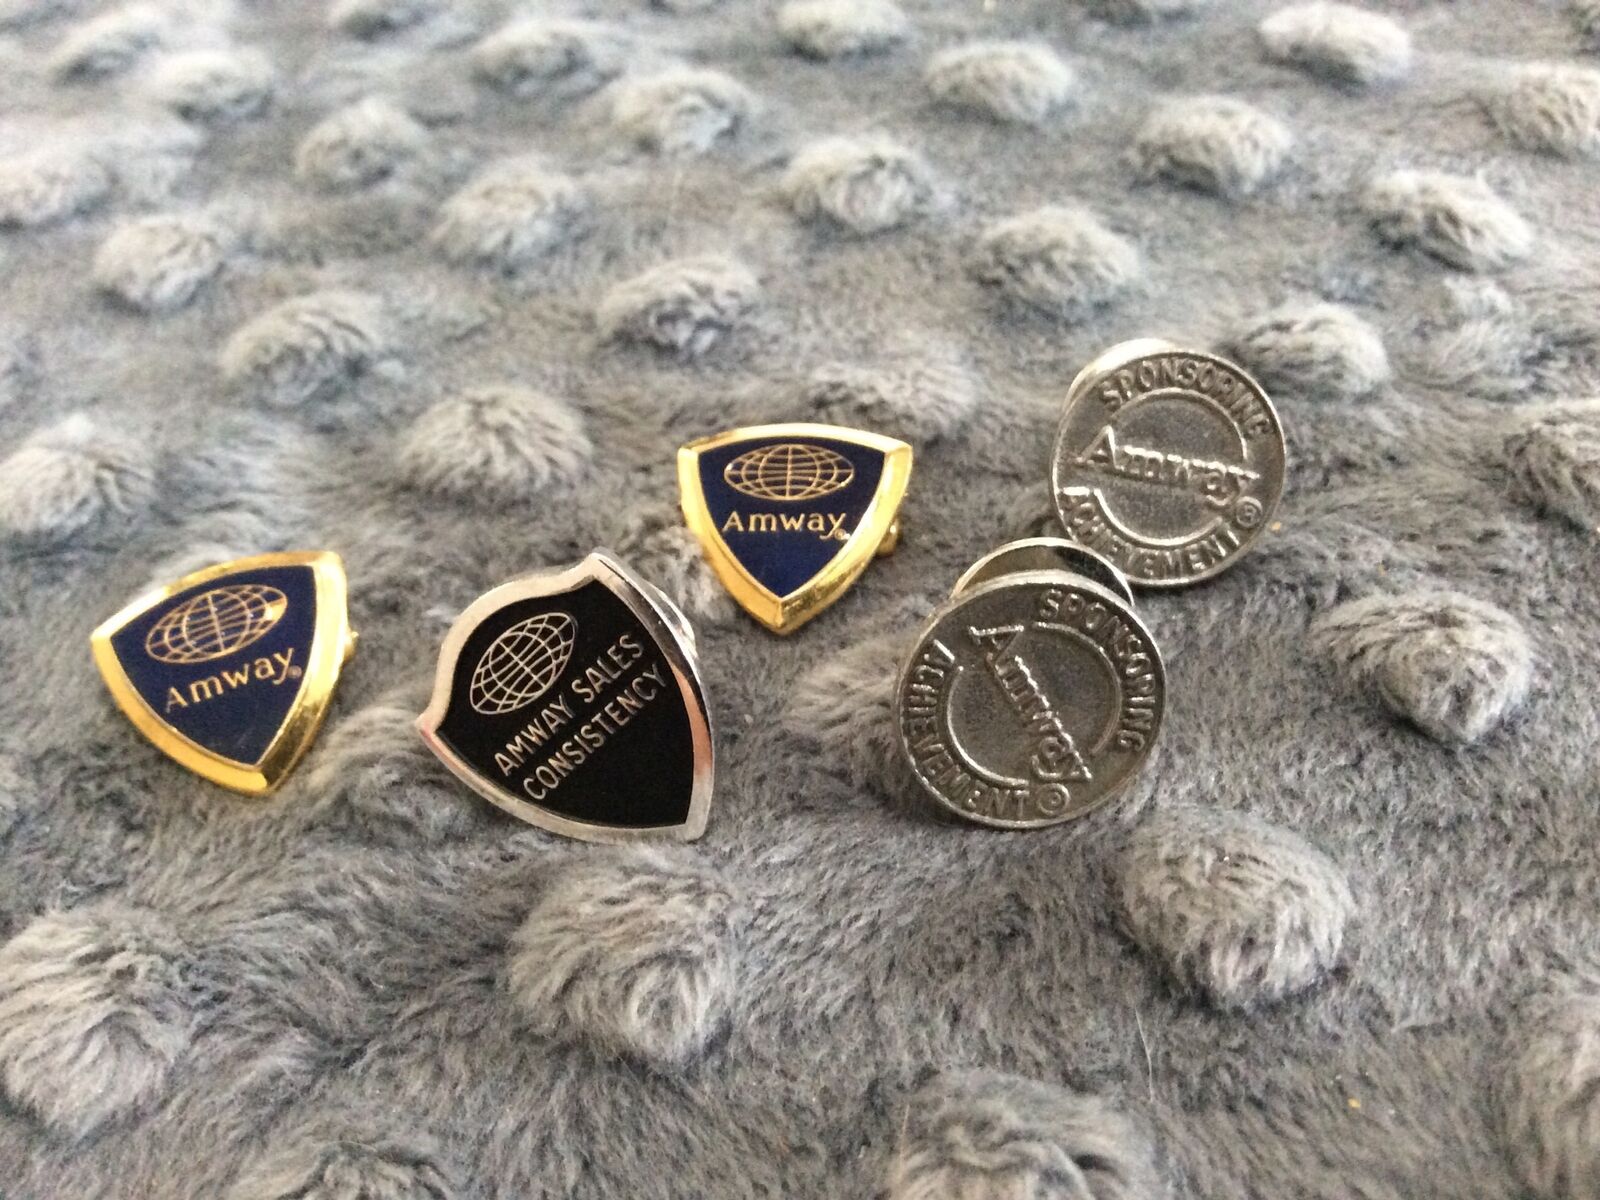 Amway Sales Consistency & Achievement Award Lot of 5 Lapel Pins